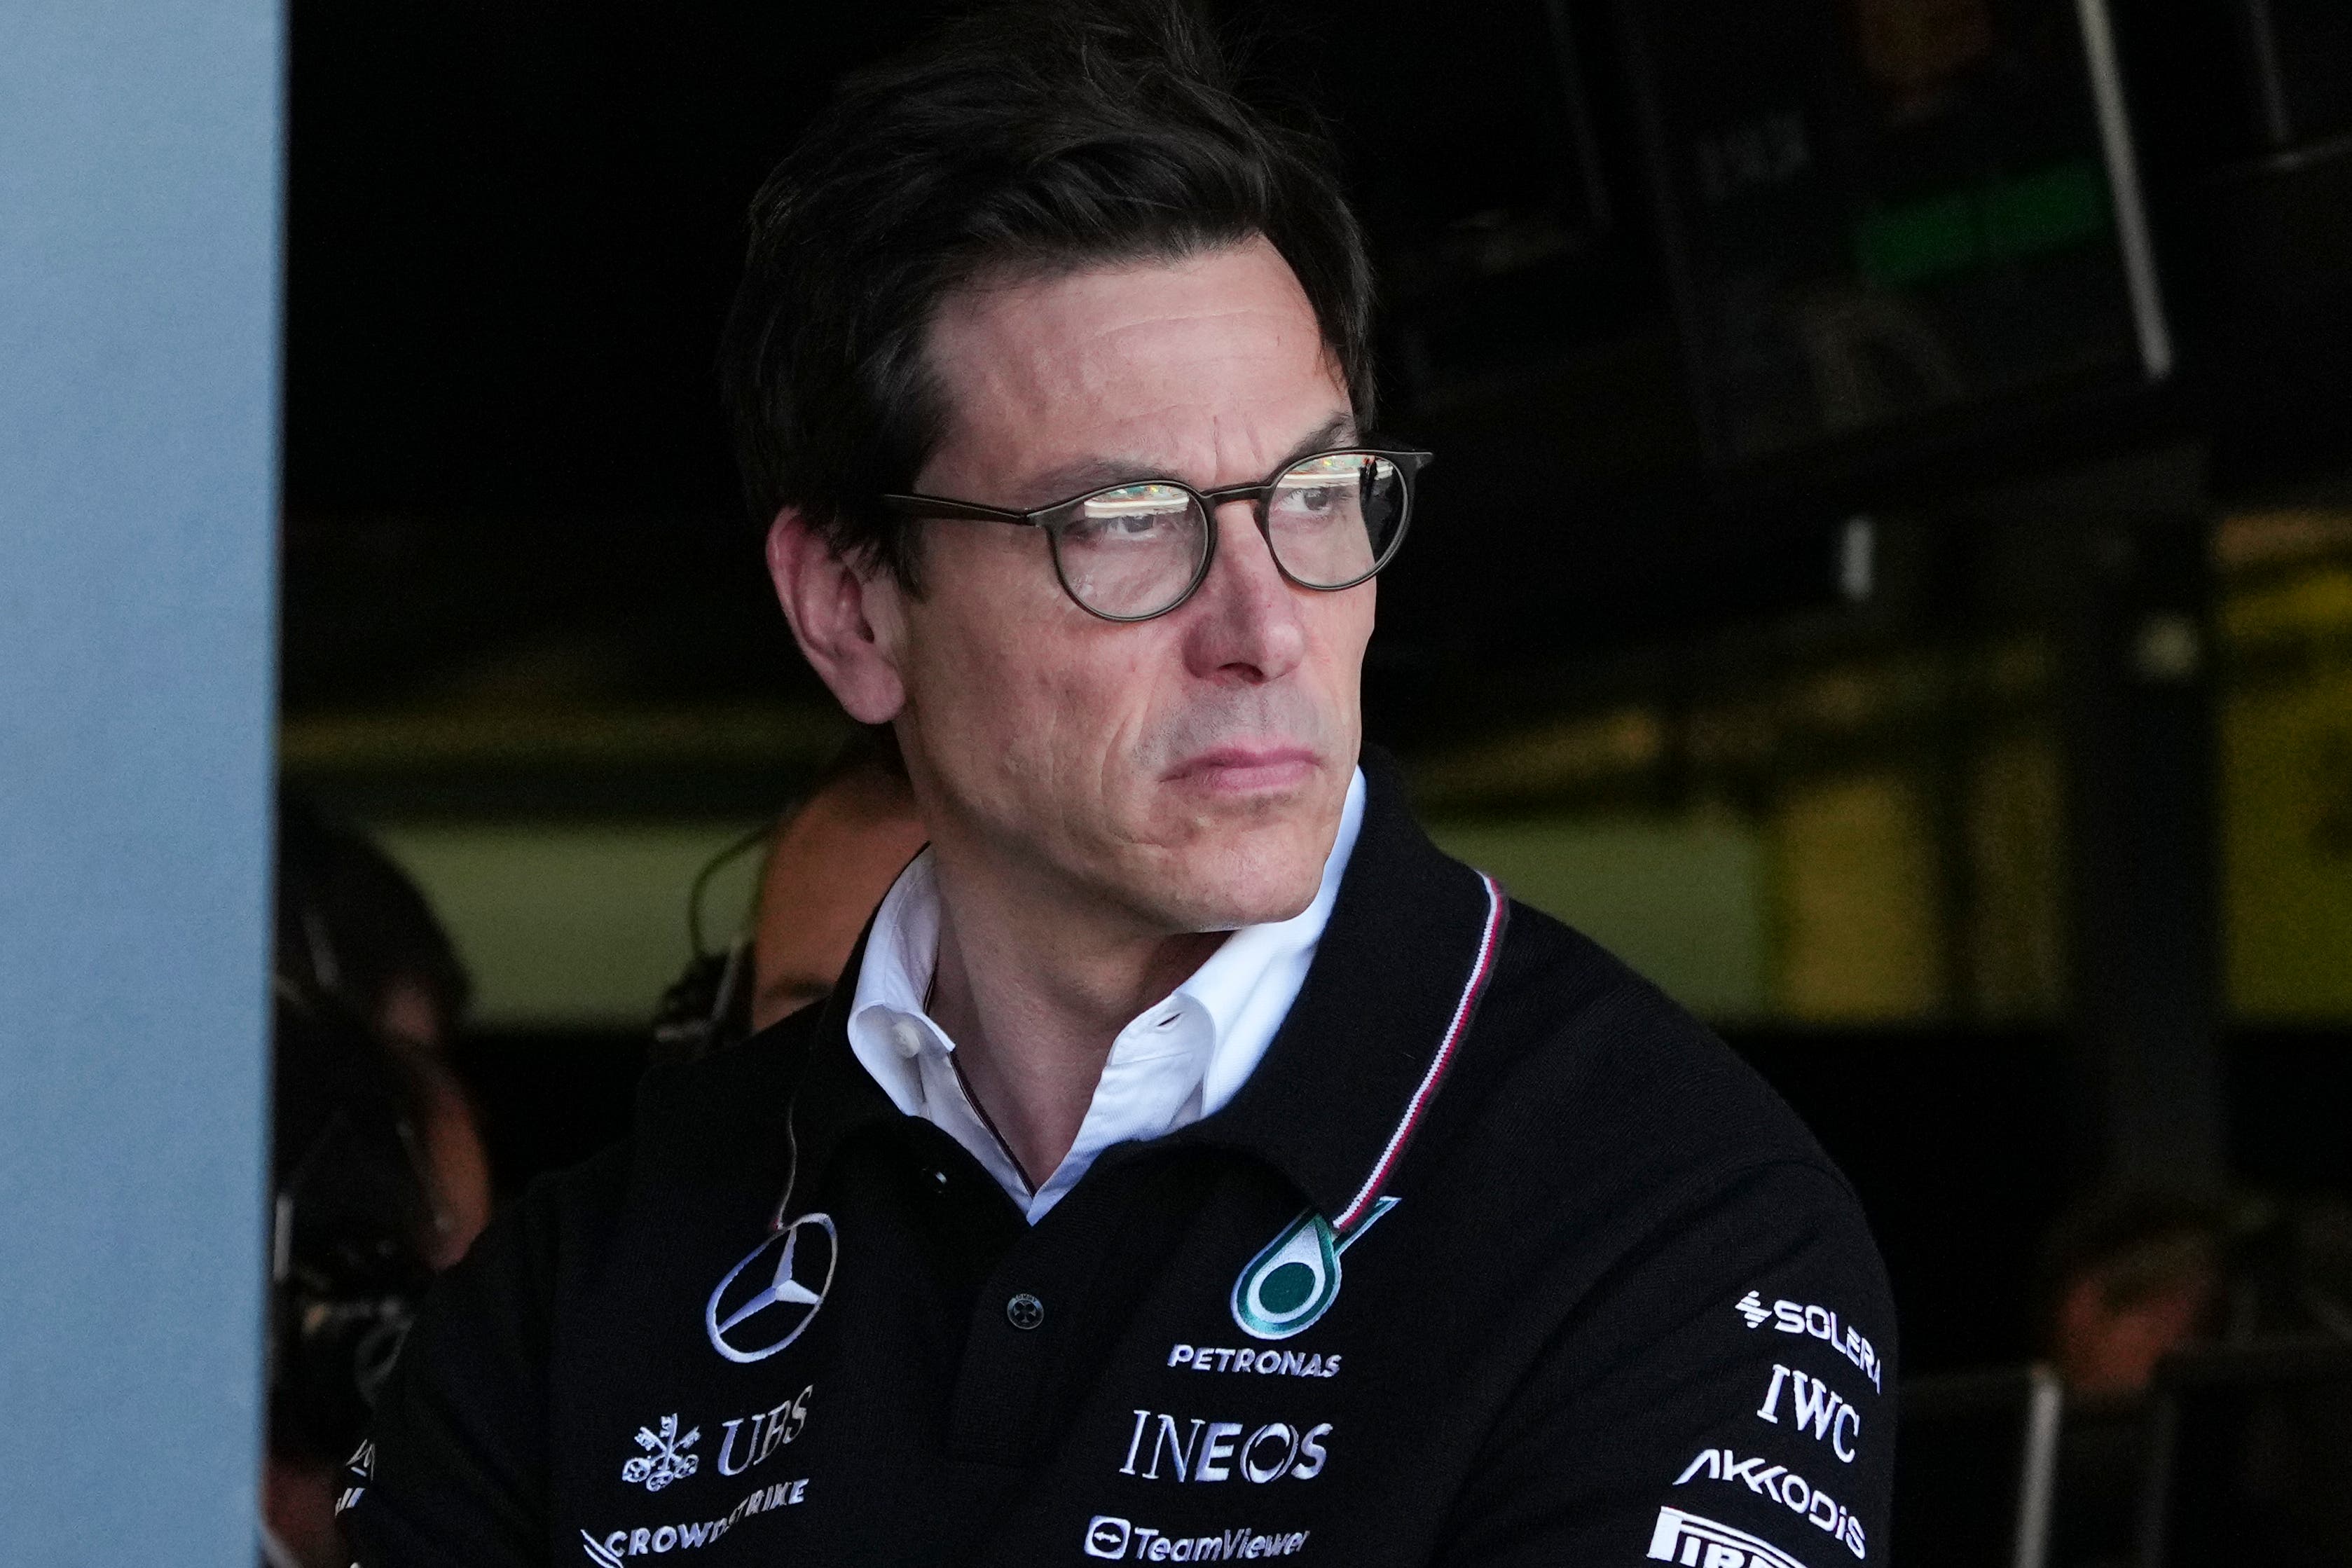 Toto Wolff has led Mercedes since 2013